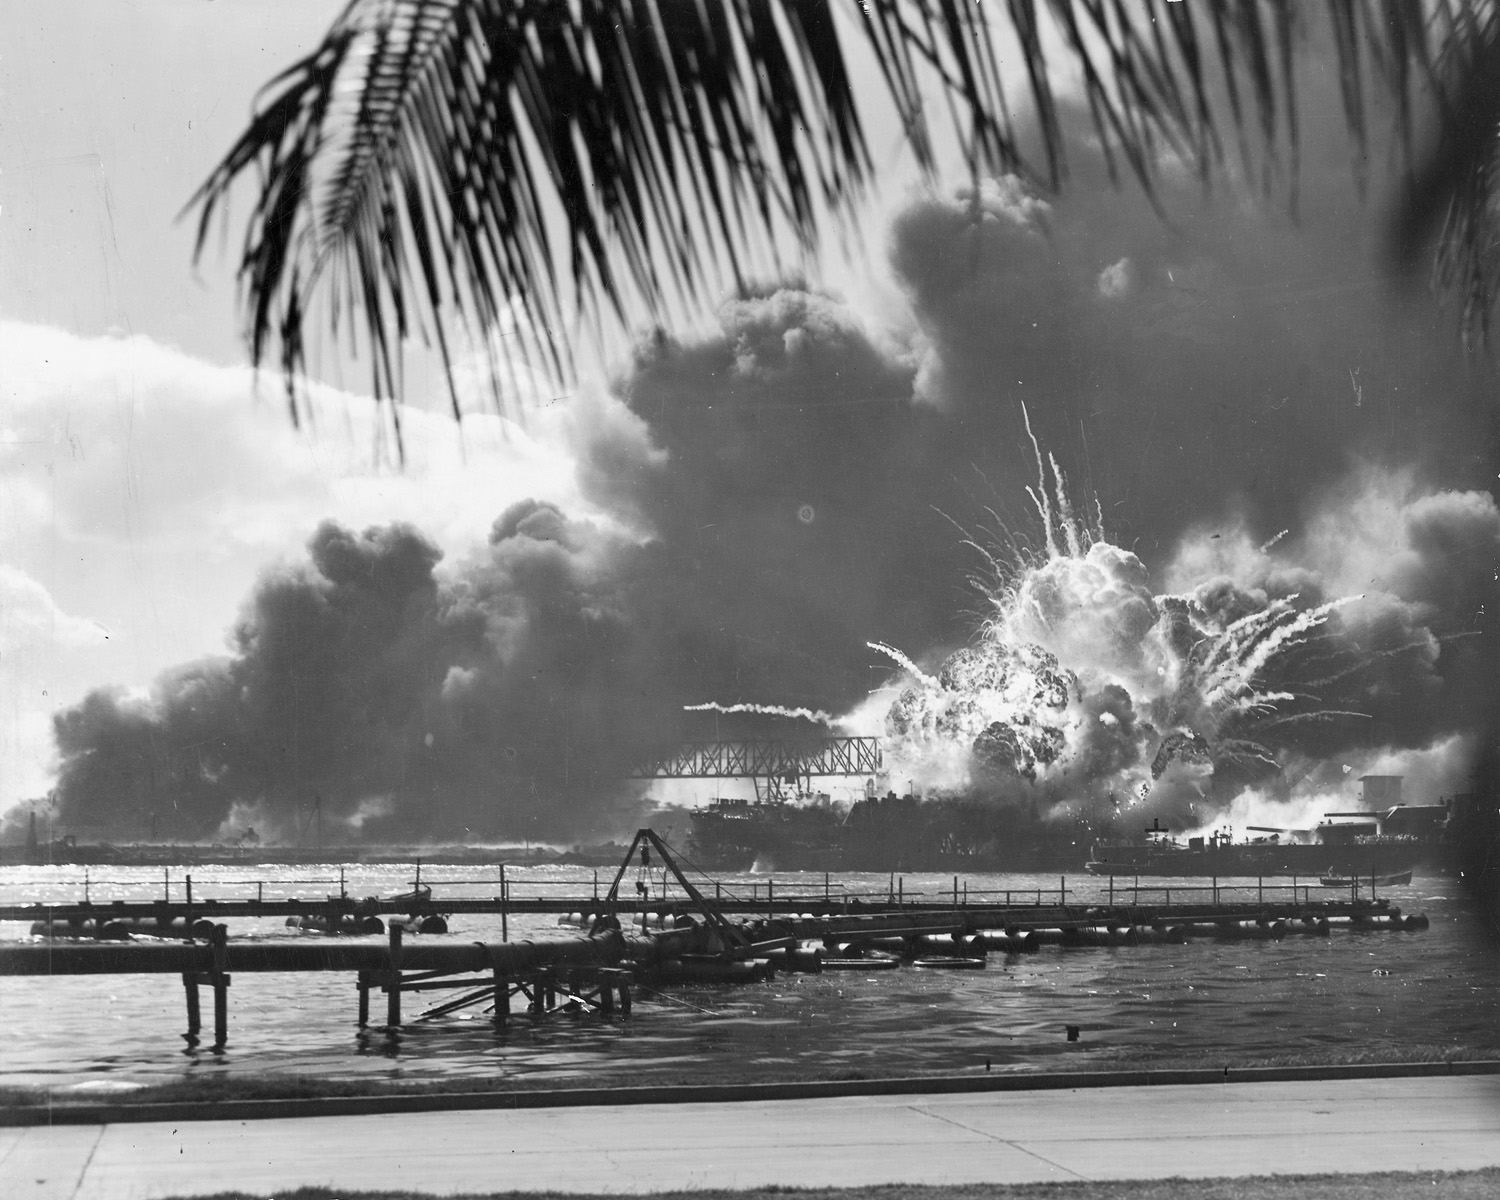 An unknown navy photographer snapped this photograph of the Japanese attack on Pearl Harbor in Hawaii on December 7, 1941, just as the USS Shaw exploded.(Wikimedia Commons)